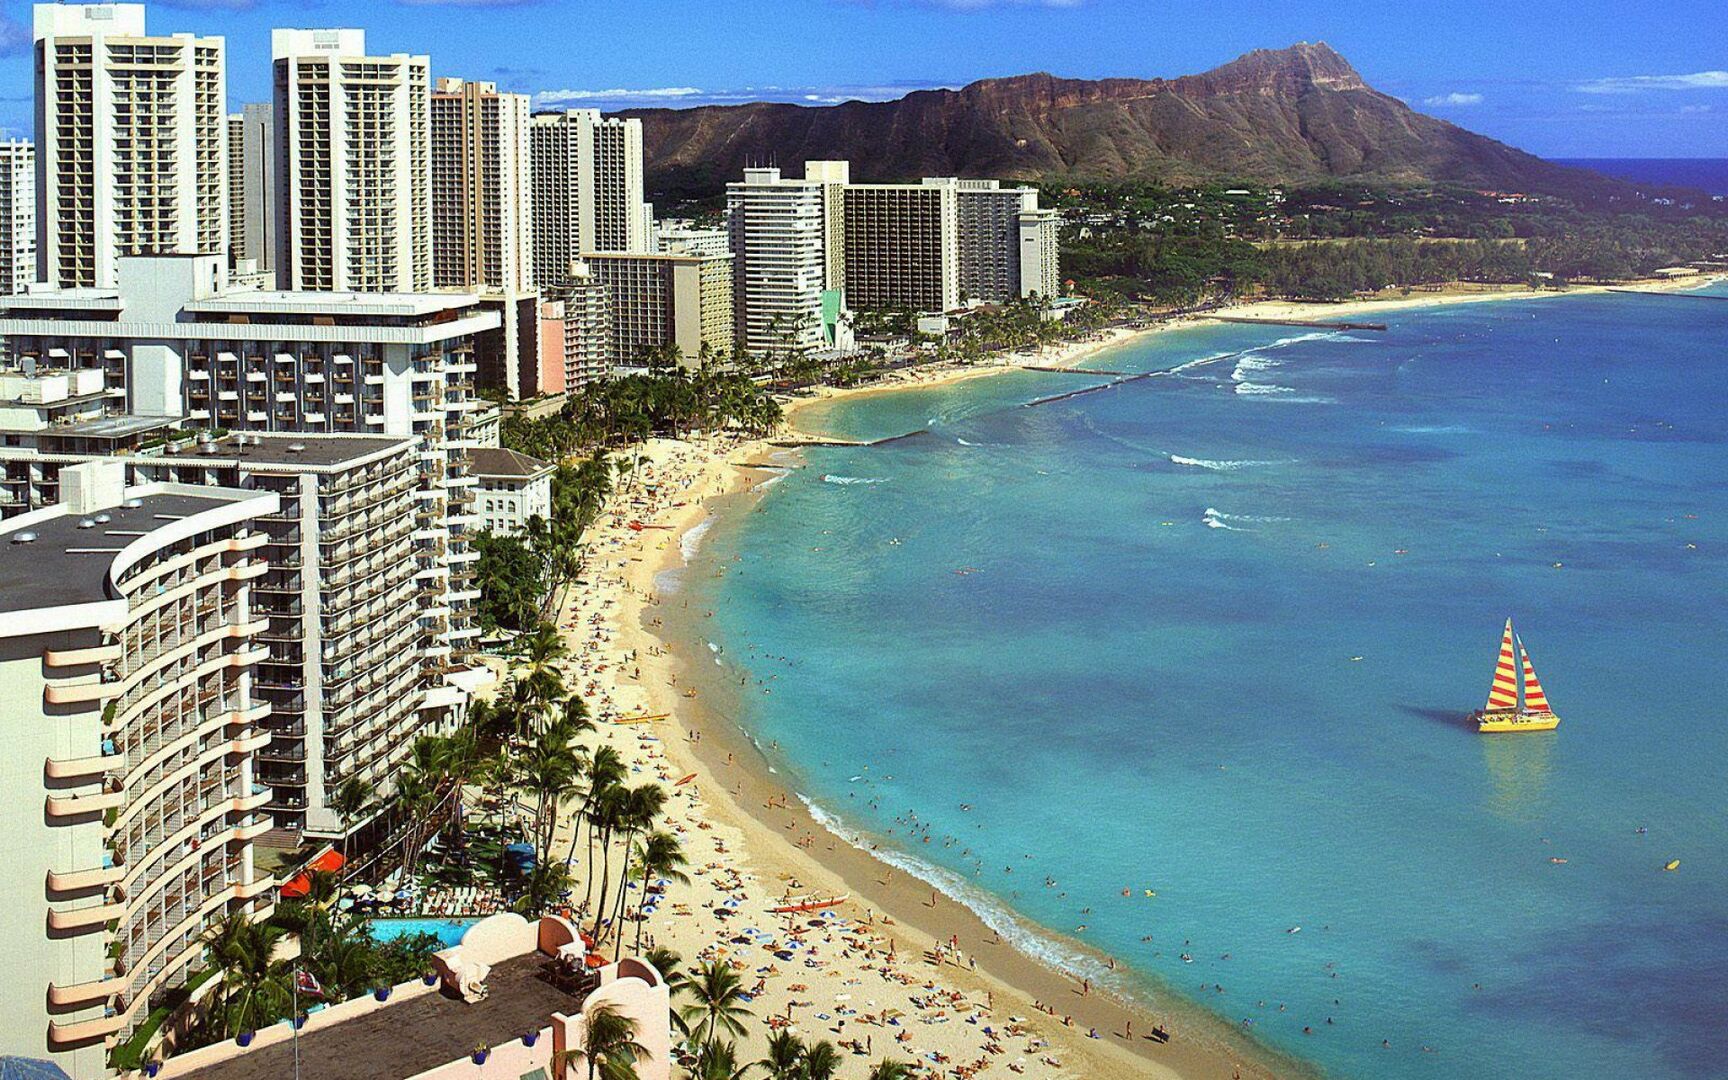 Waikiki and the Diamond Head in the background